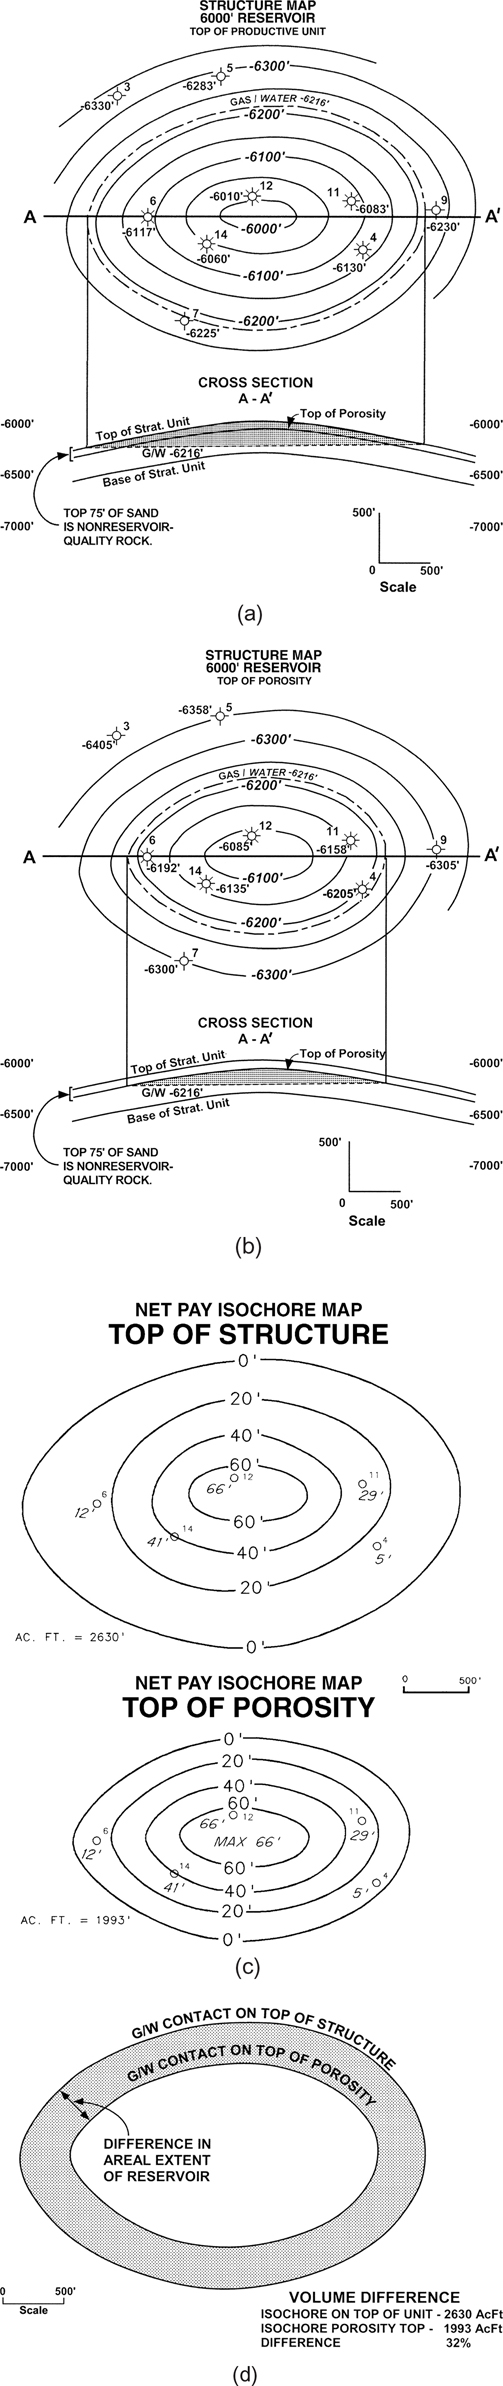 A figure shows the construction of two structure maps with their isochore maps for the top of porosity and structure.